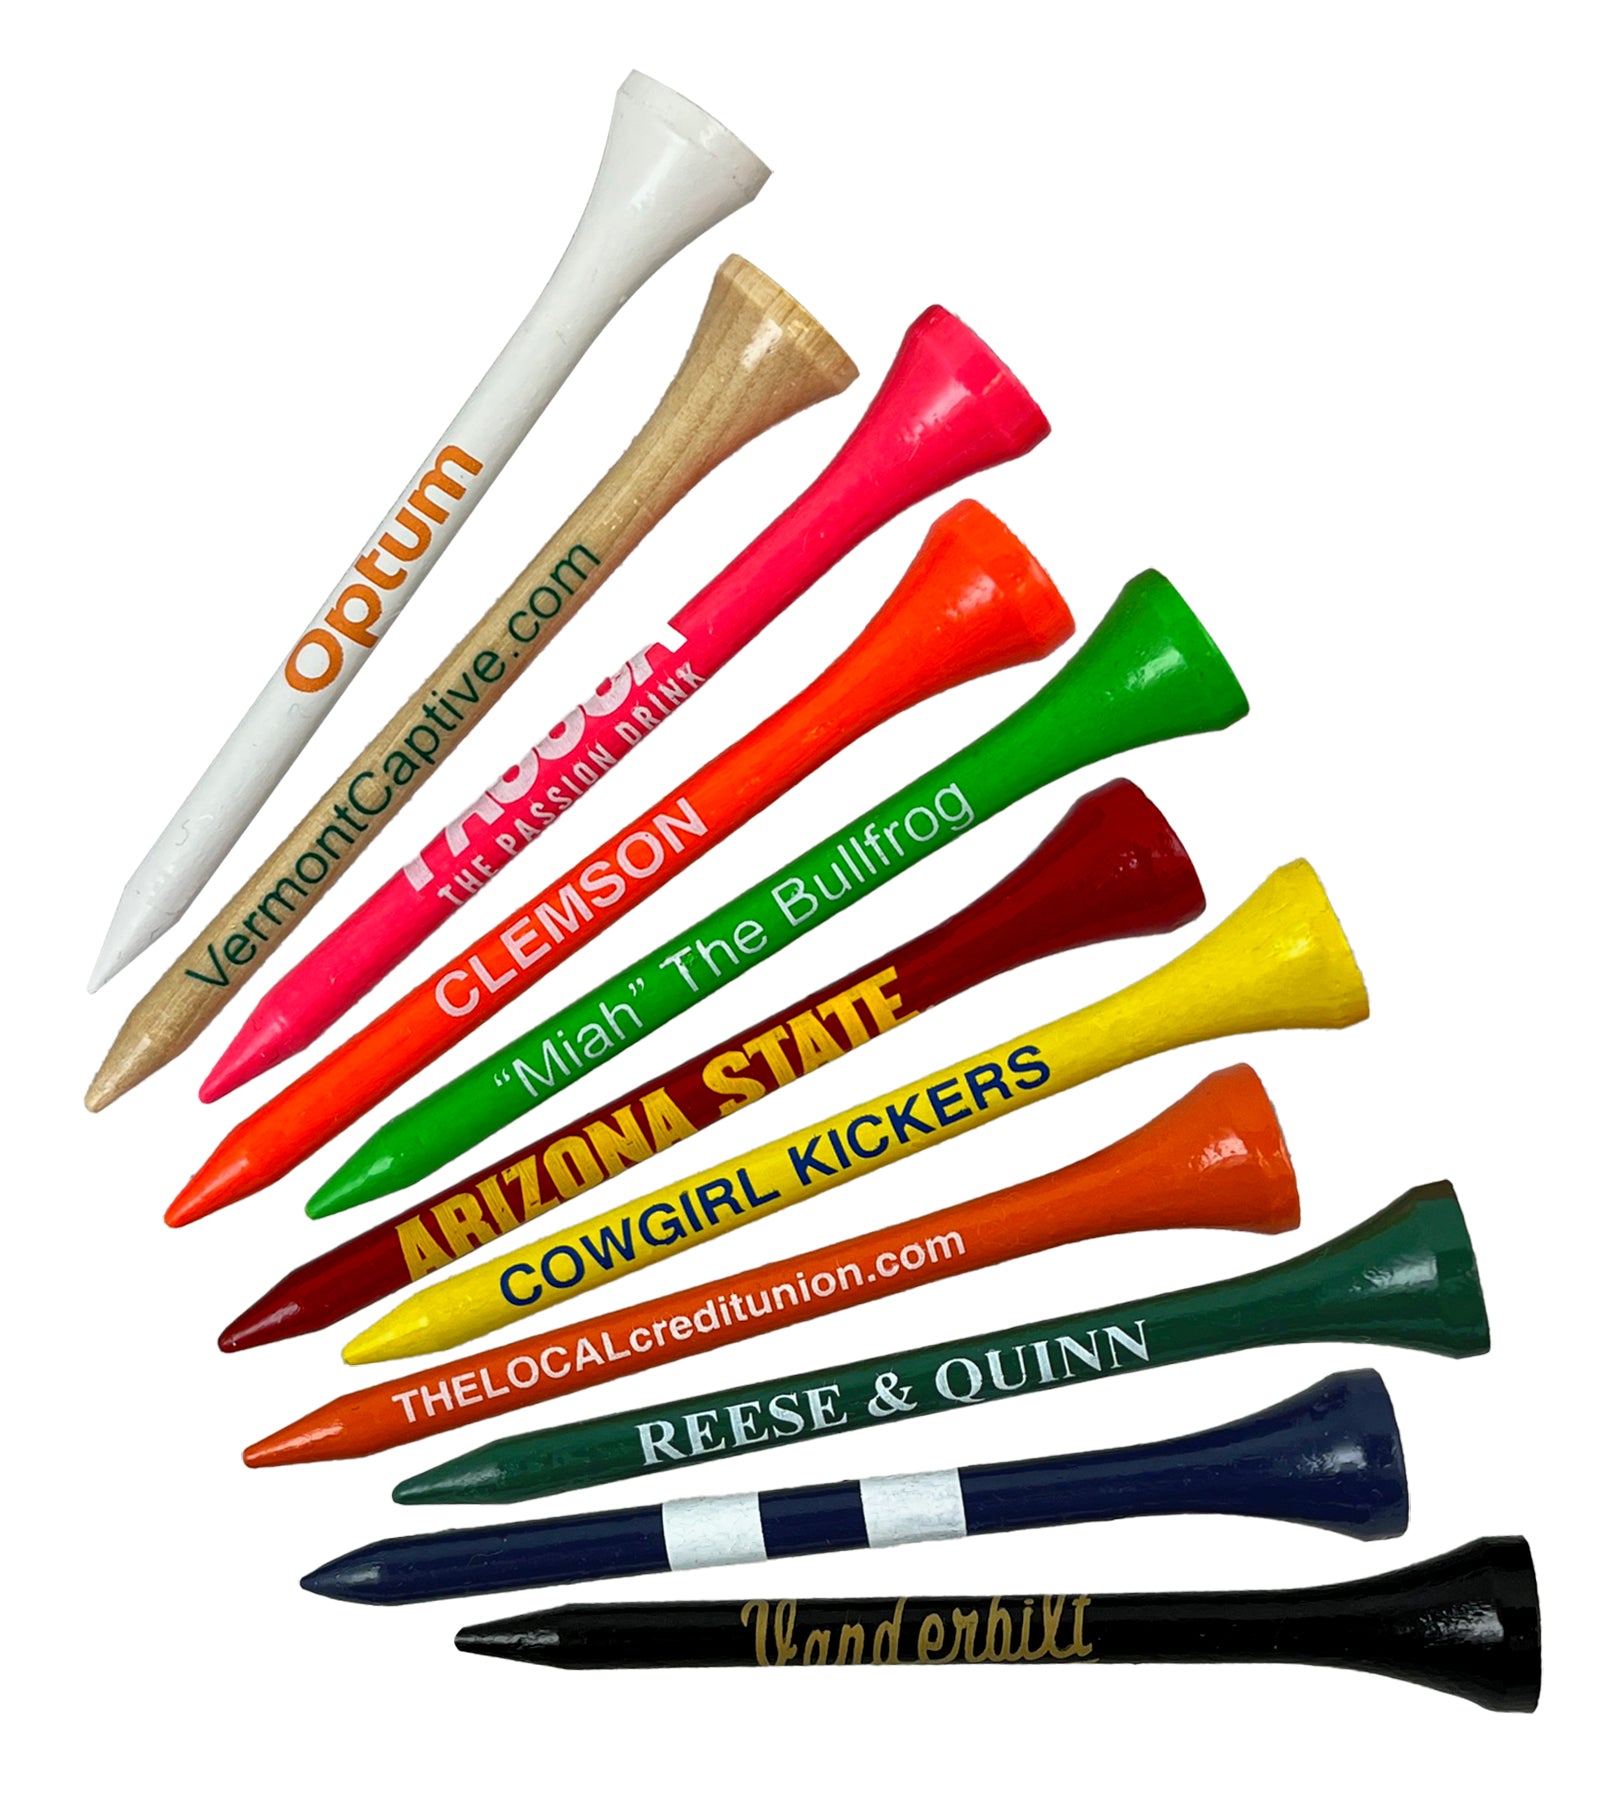 2 3/4" Personalized Wood Golf Tees